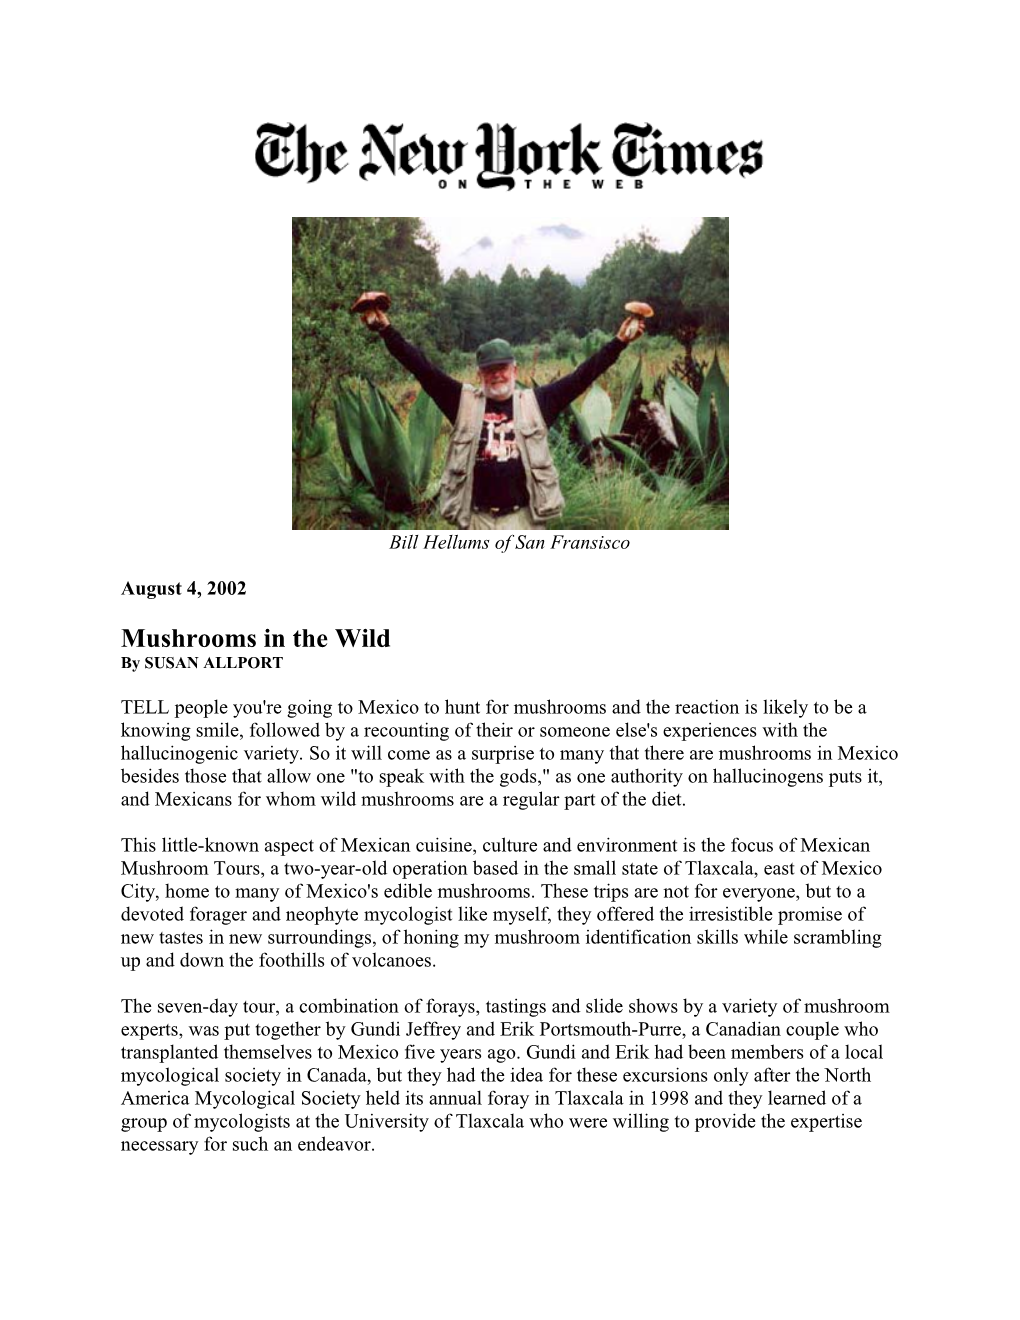 August 4, 2002 the New York Times Travel Section